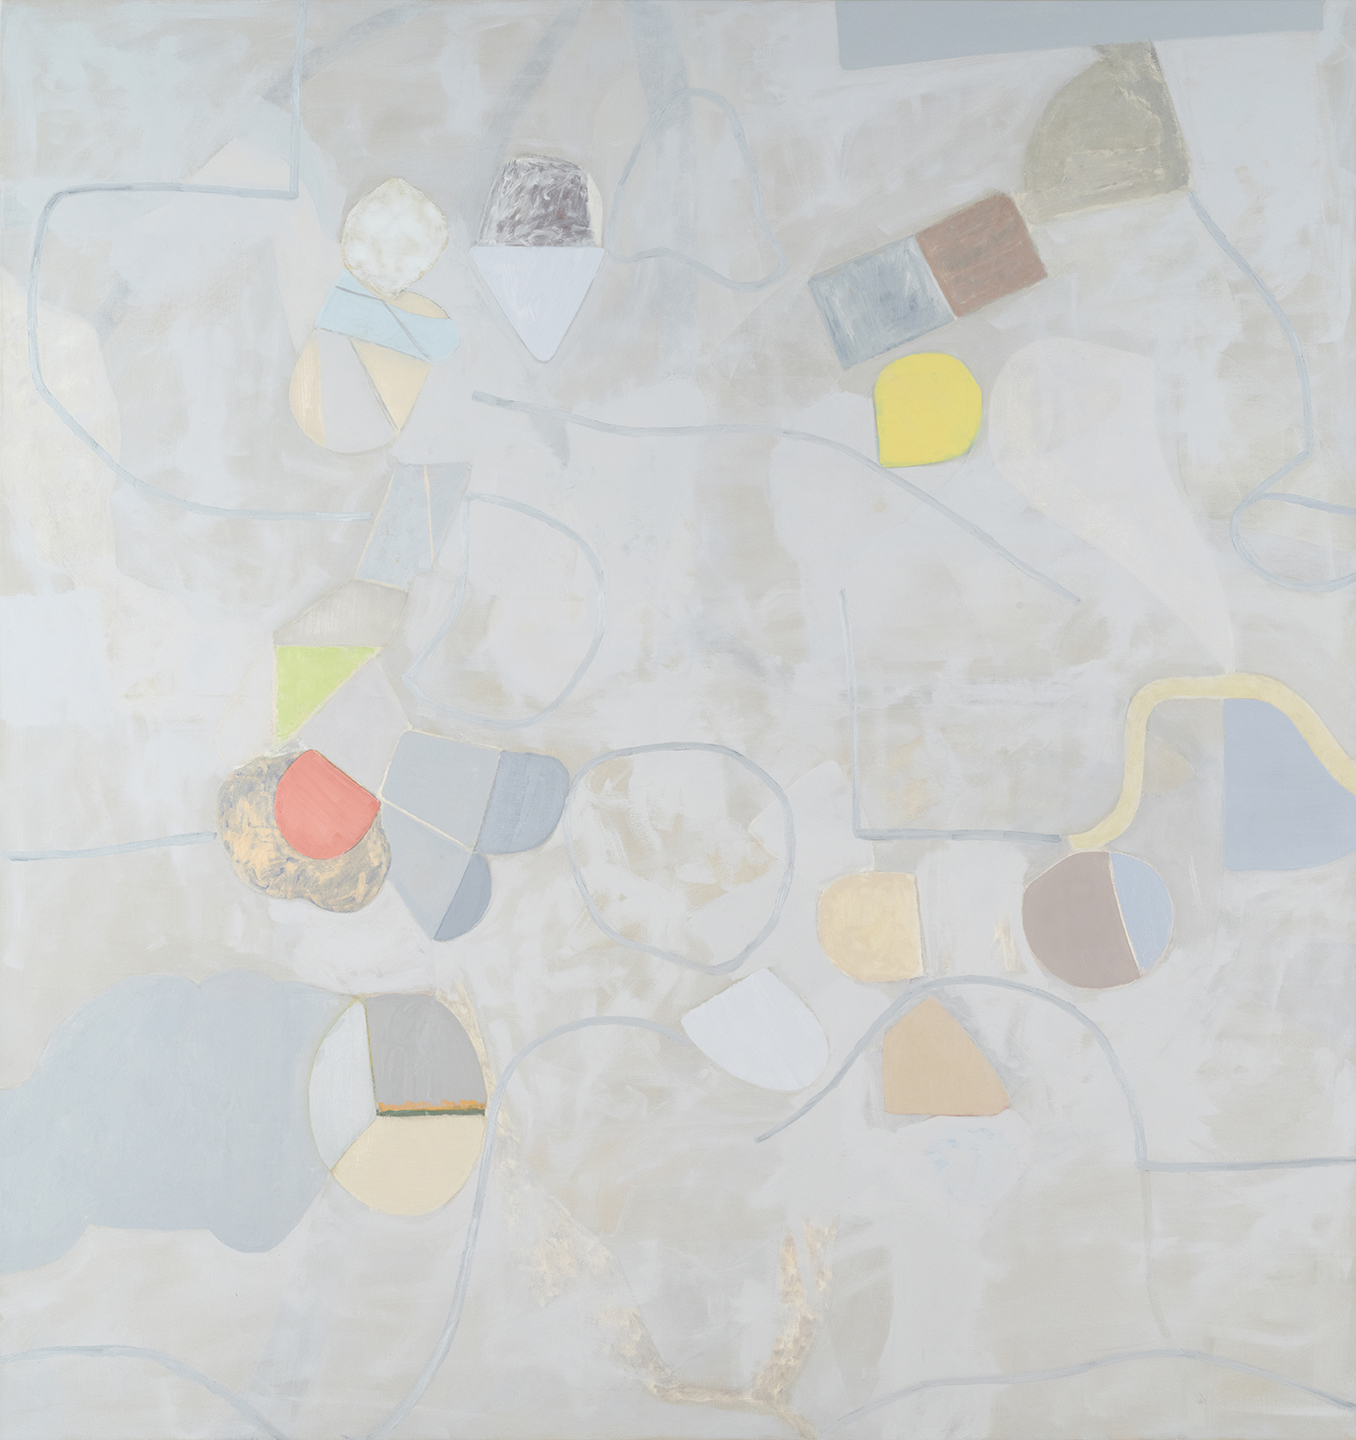 Remote Sensing, 2019, oil on canvas, 68 x 64 inches.